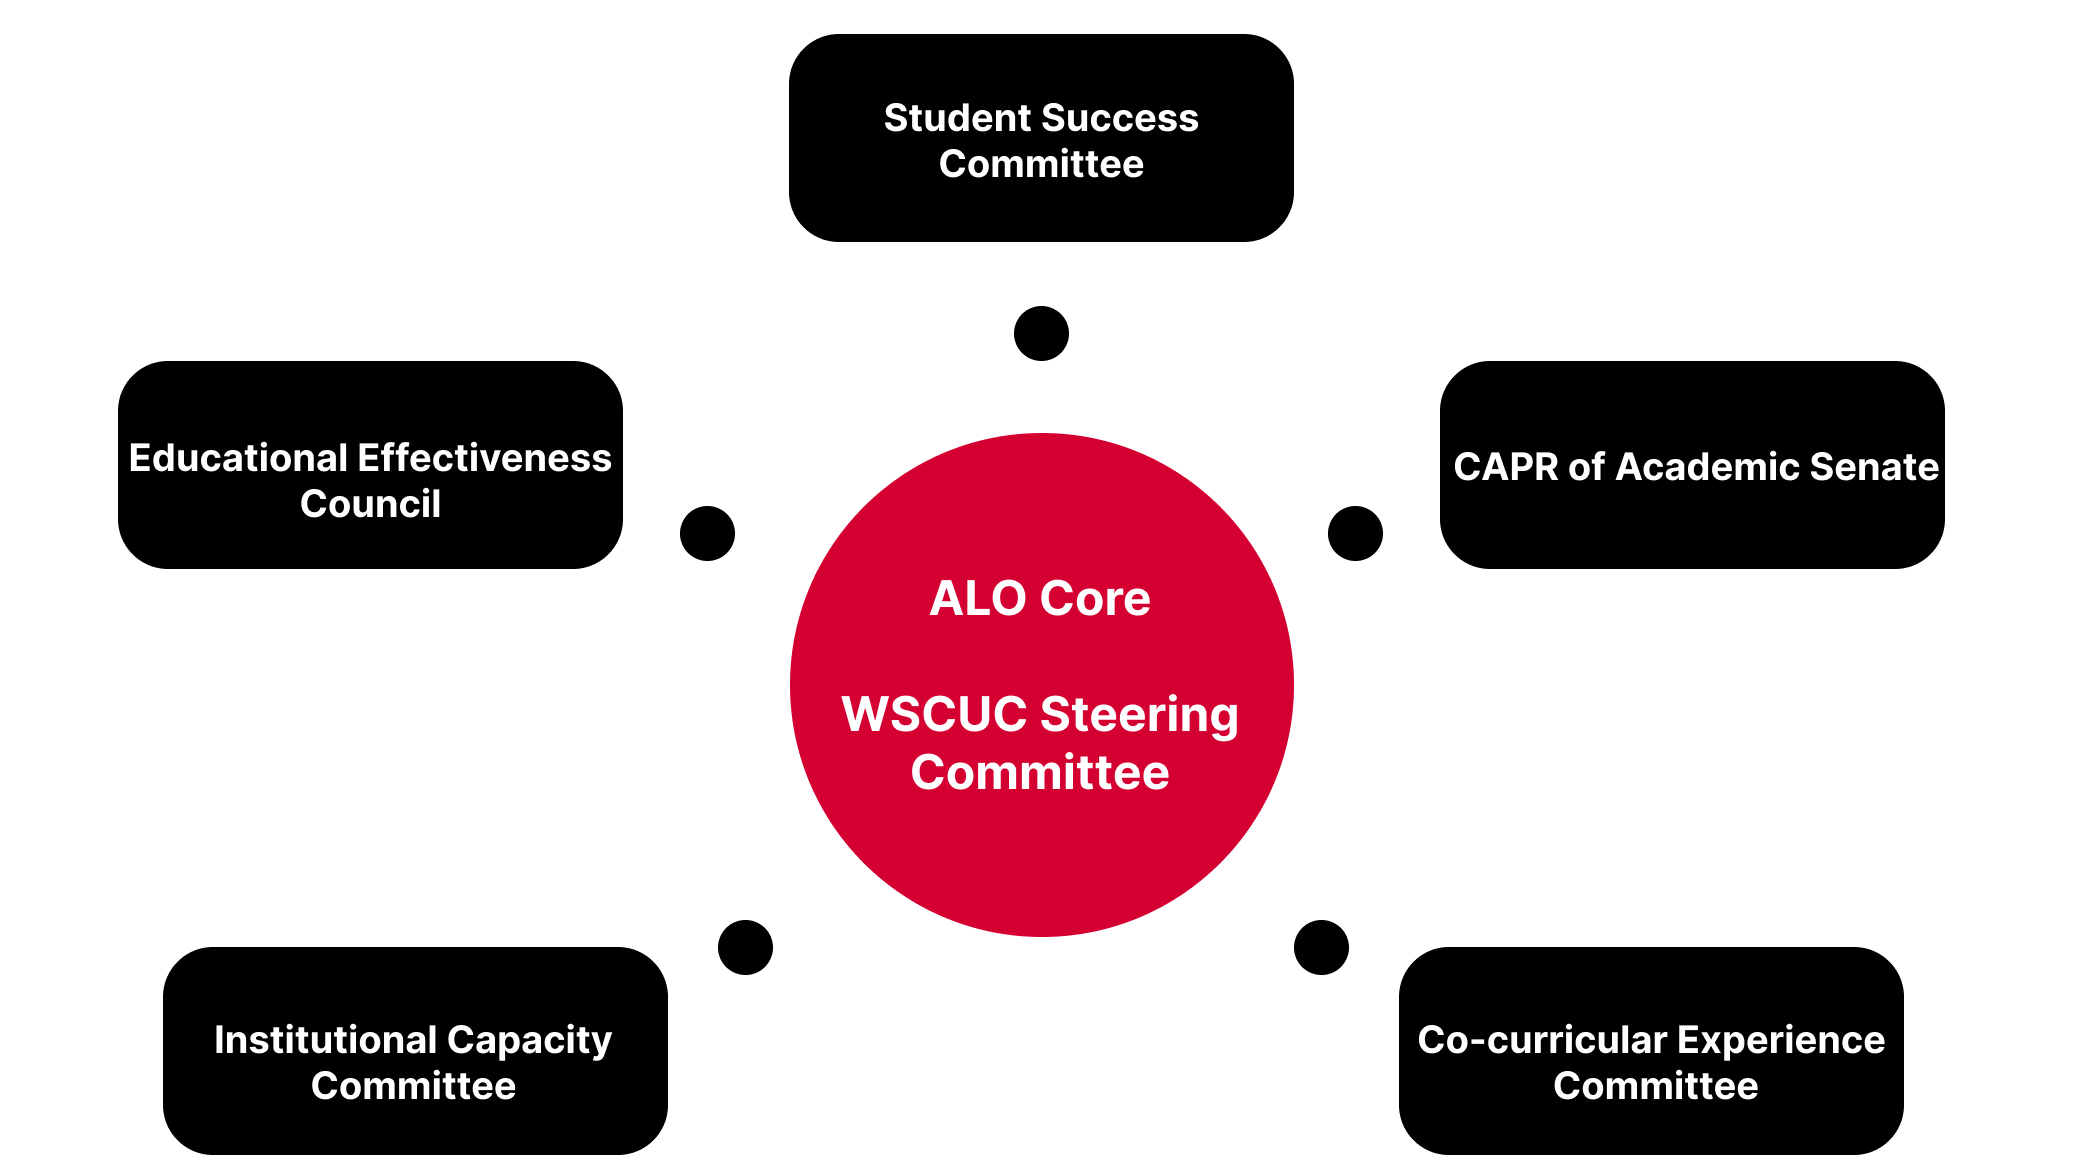 ALO Core  WSCUC Steering Committee graph